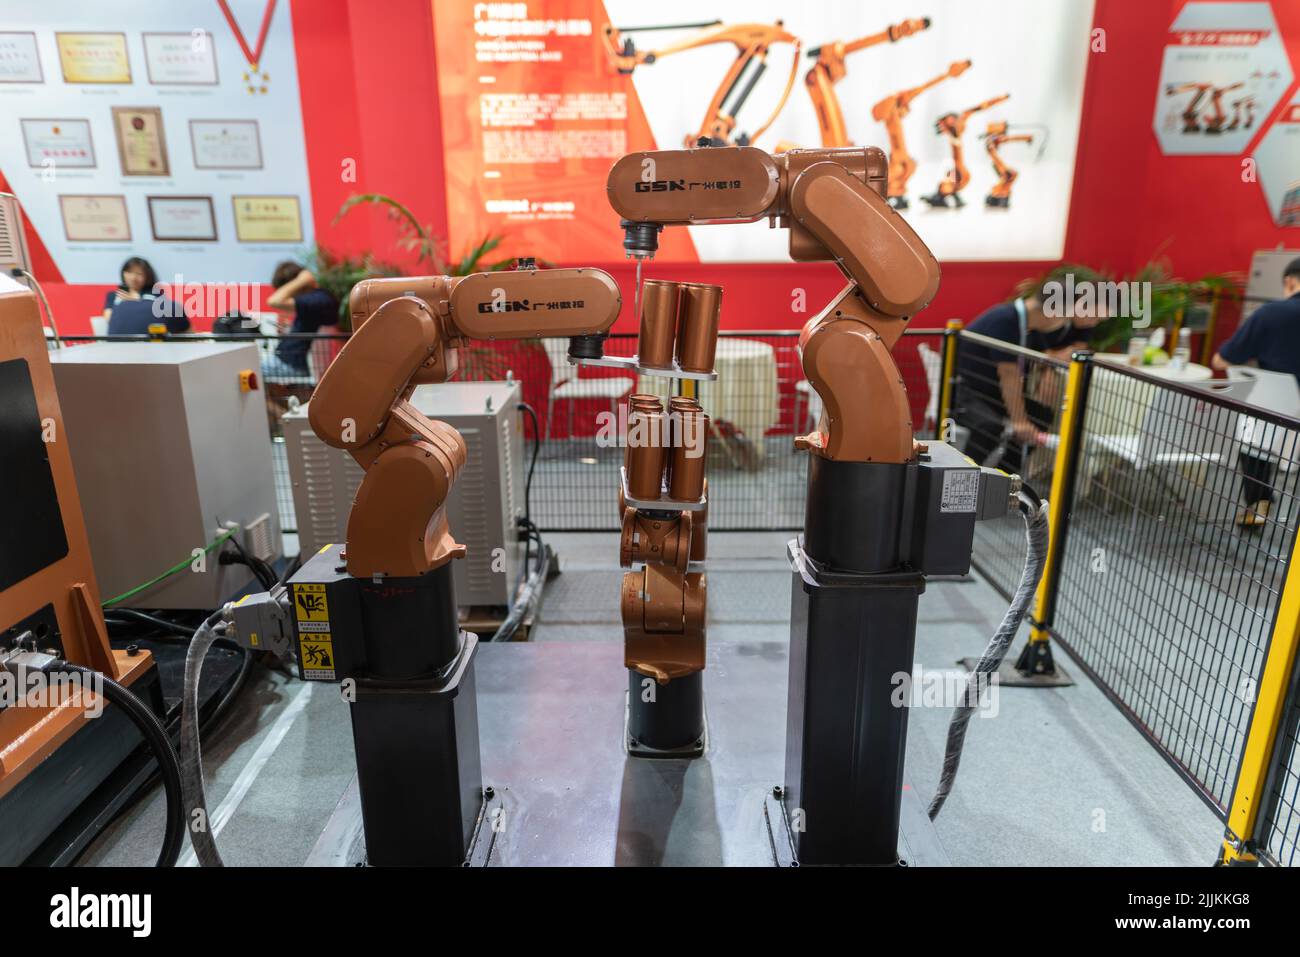 A Robot arm display in Smart China Expo in Chongqing, China Stock Photo